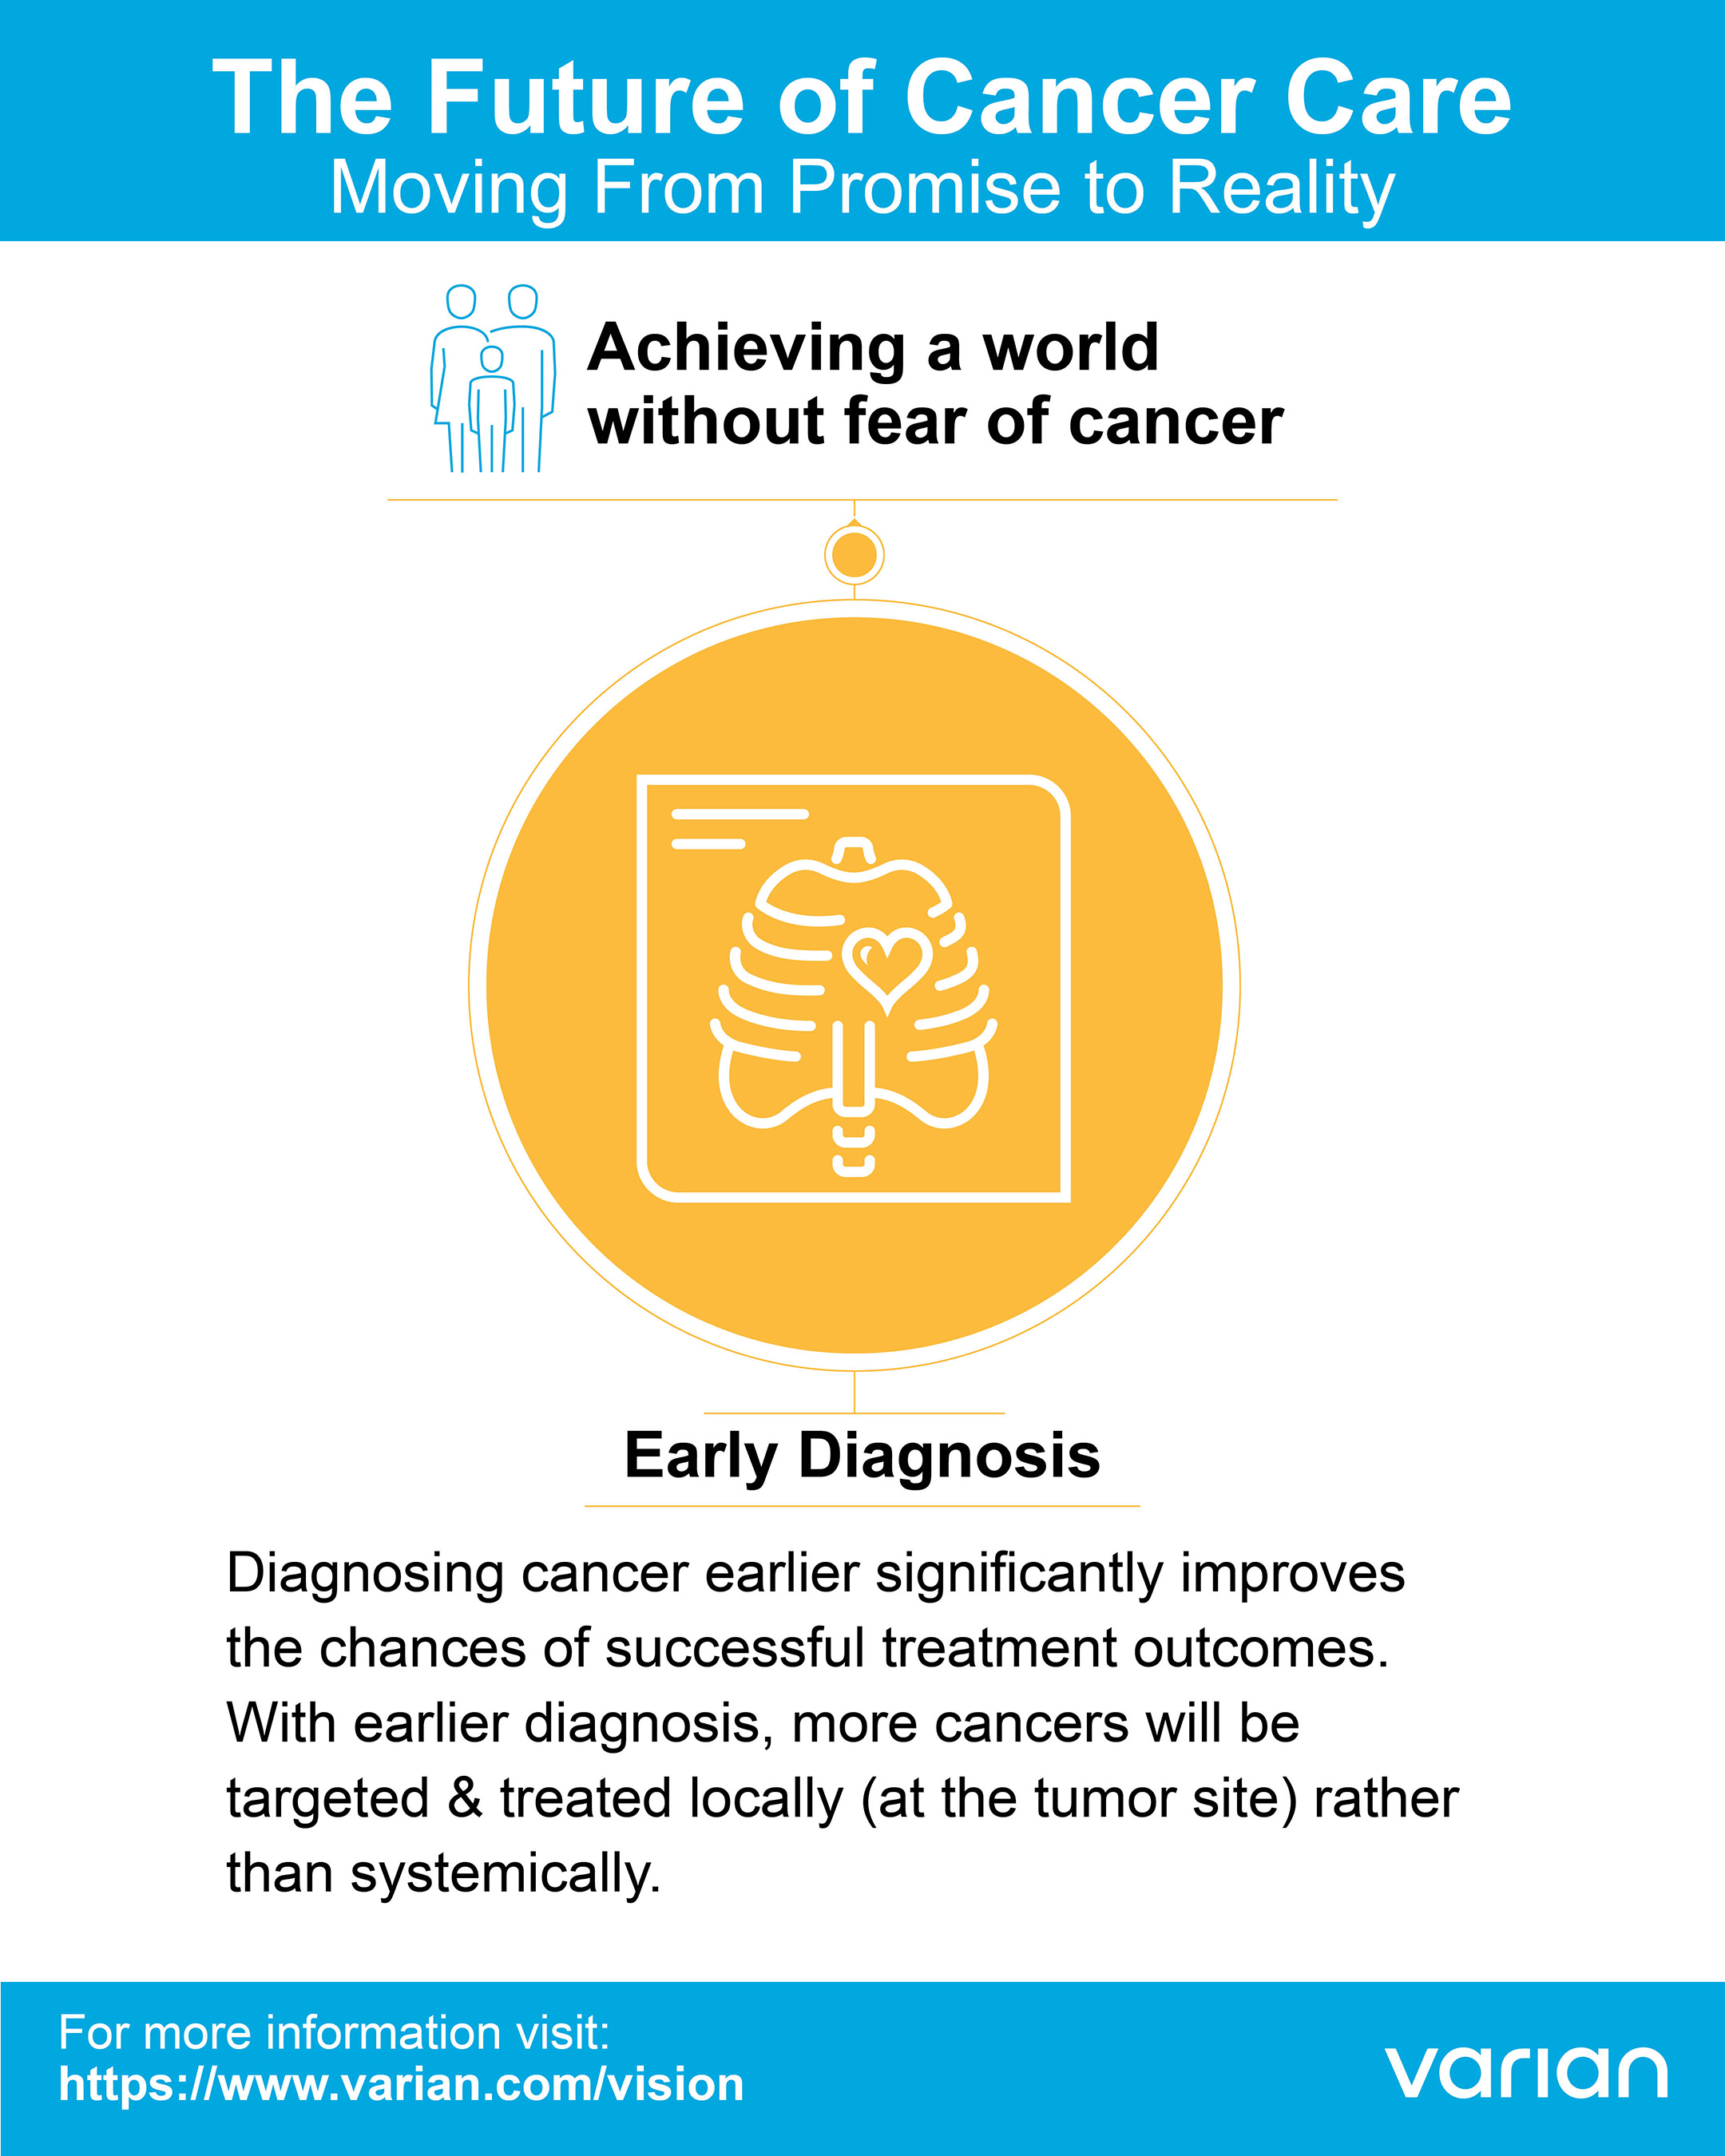 Benefits of Early Diagnosis